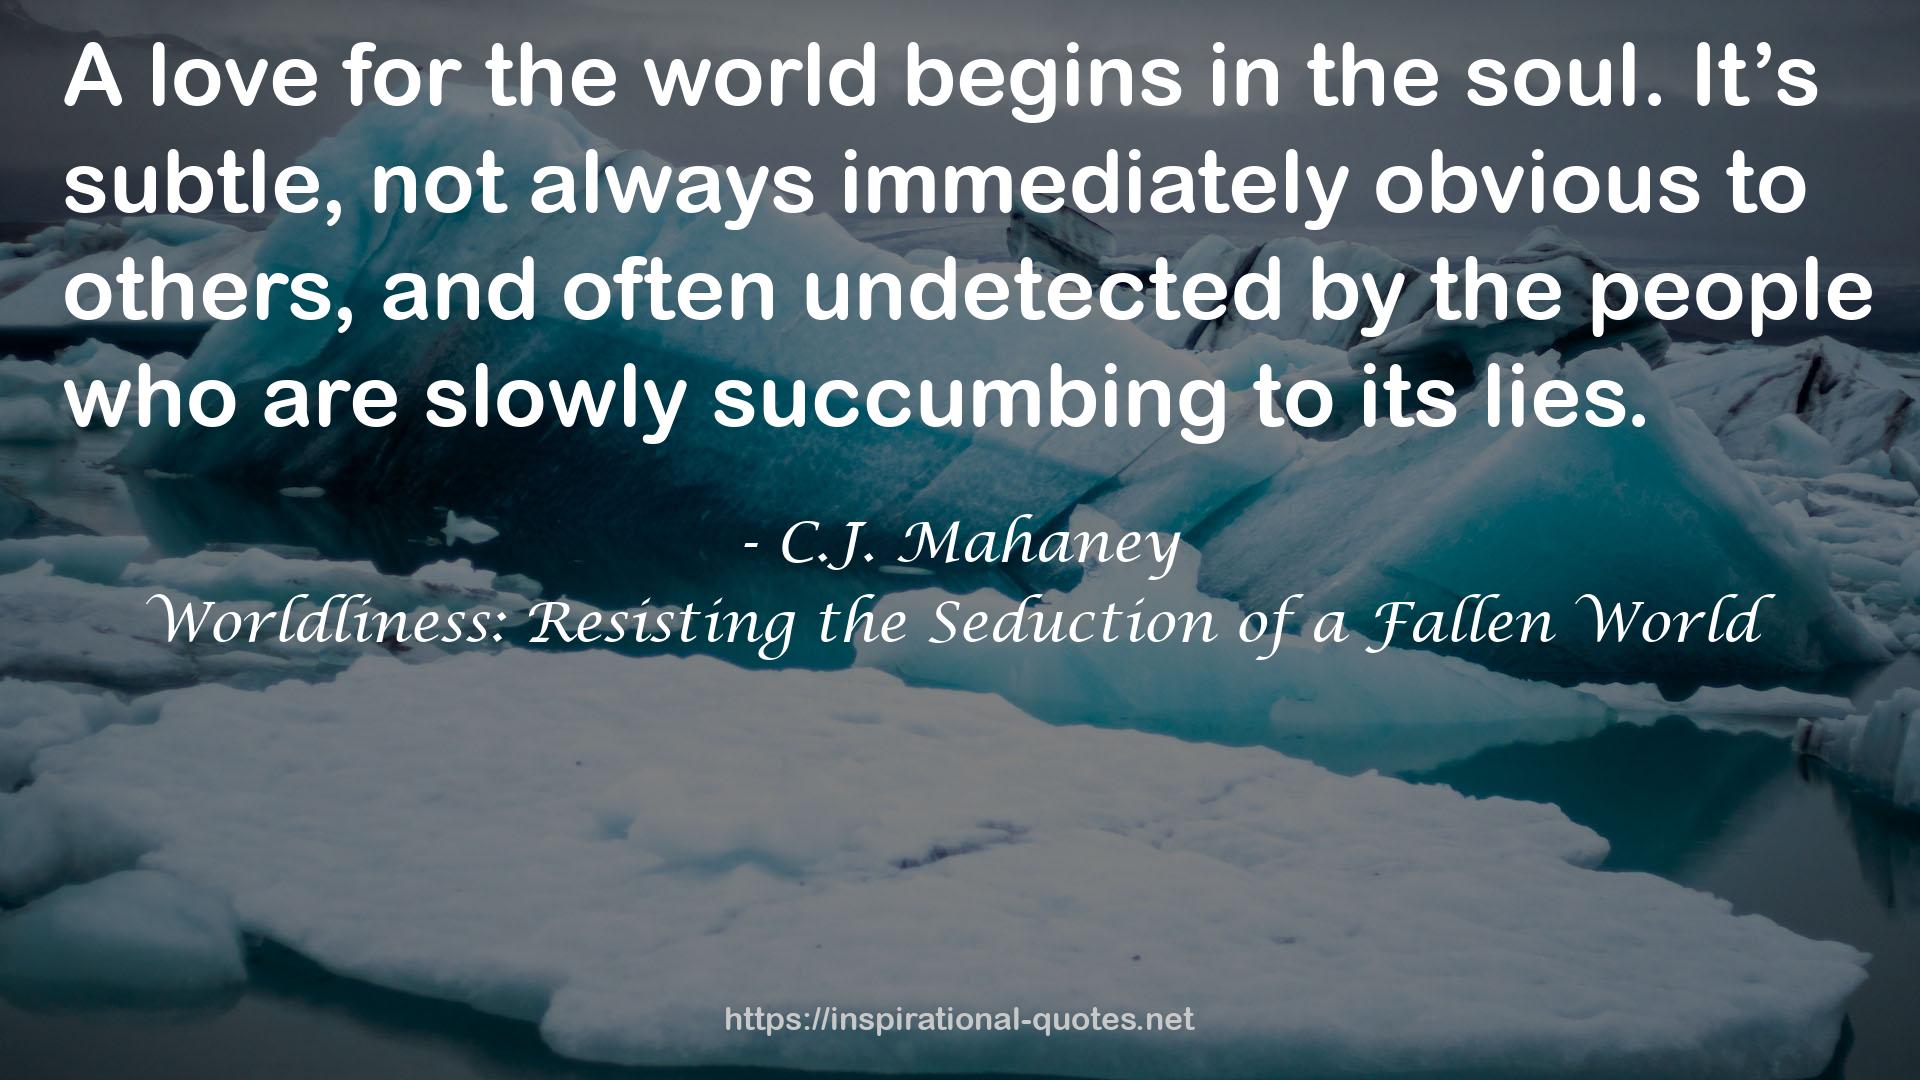 Worldliness: Resisting the Seduction of a Fallen World QUOTES